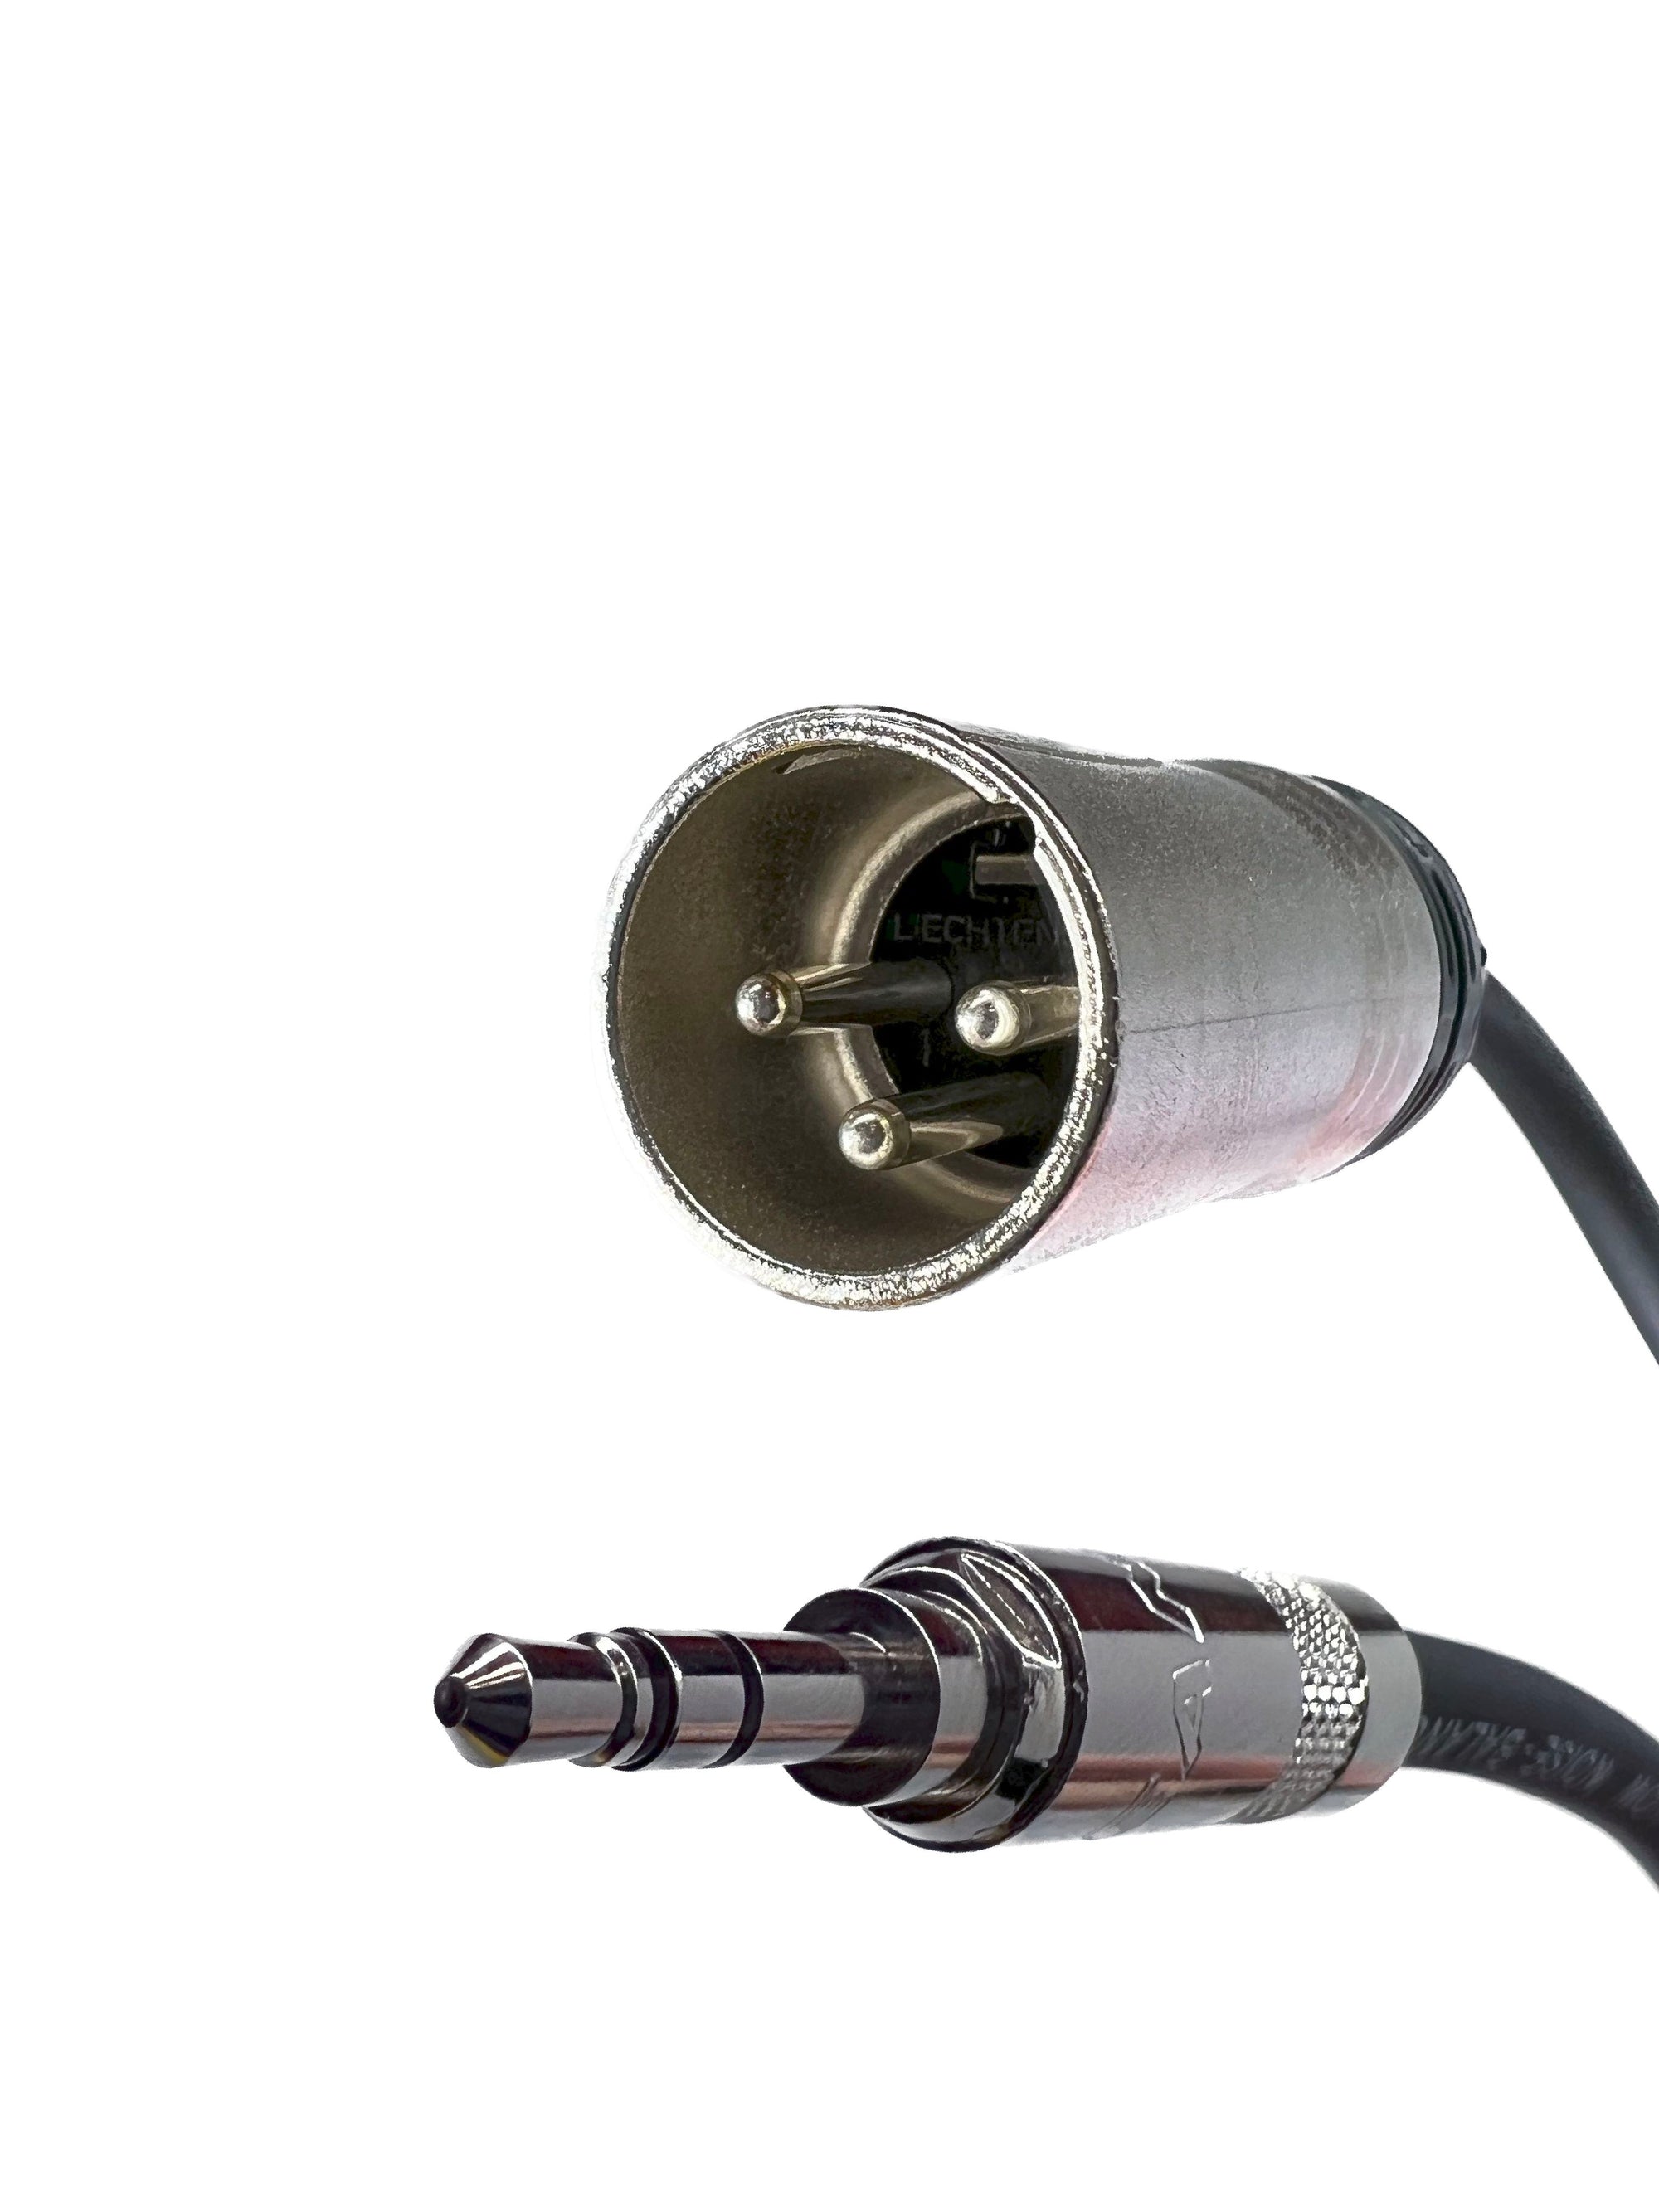 Unbalanced Dual RCA Male to XLR Male Stereo Audio Cable